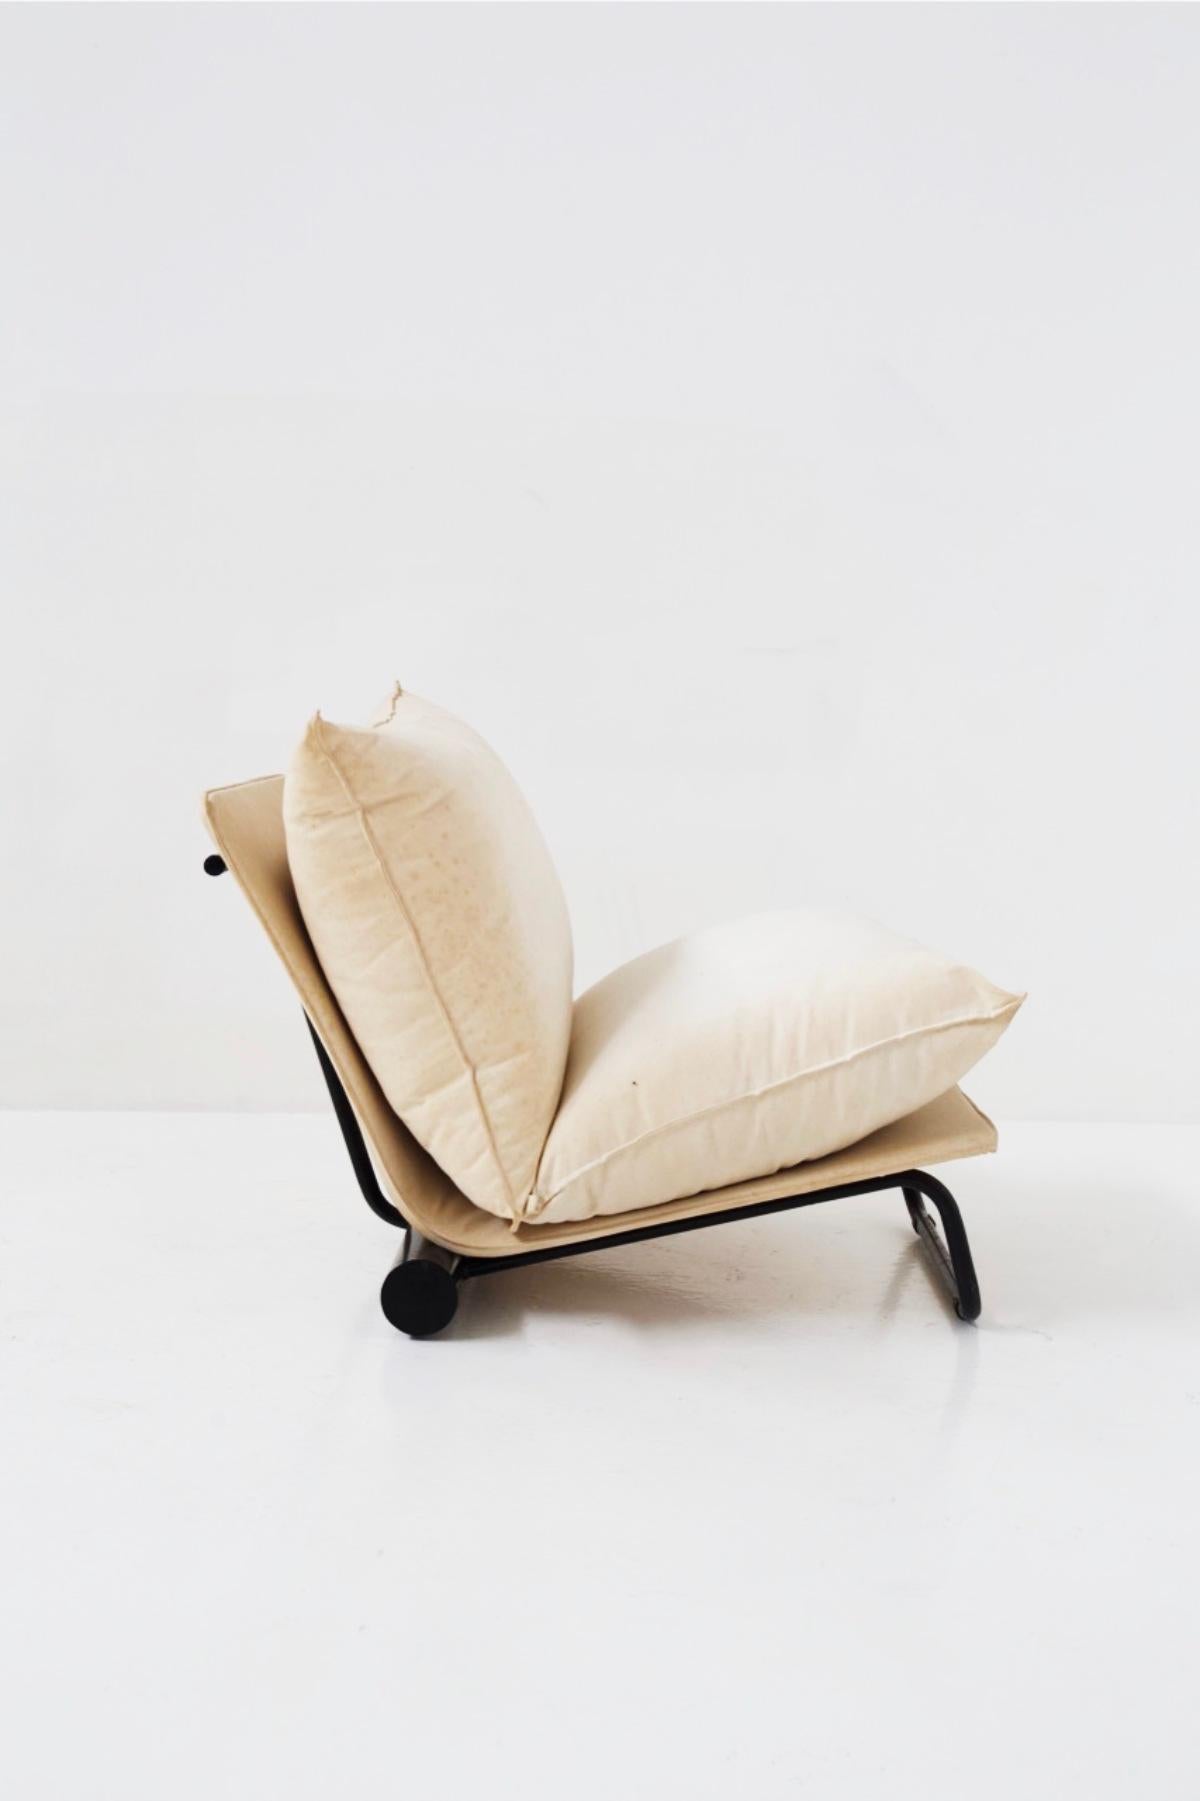 Rare 1970s vintage armchair in painted metal and cotton designed by LO Design for the fine Italian manufacturer Elam.
The armchair has a very unusual structure: in fact there are two unique feet, one at the front and one at the back. The one at the